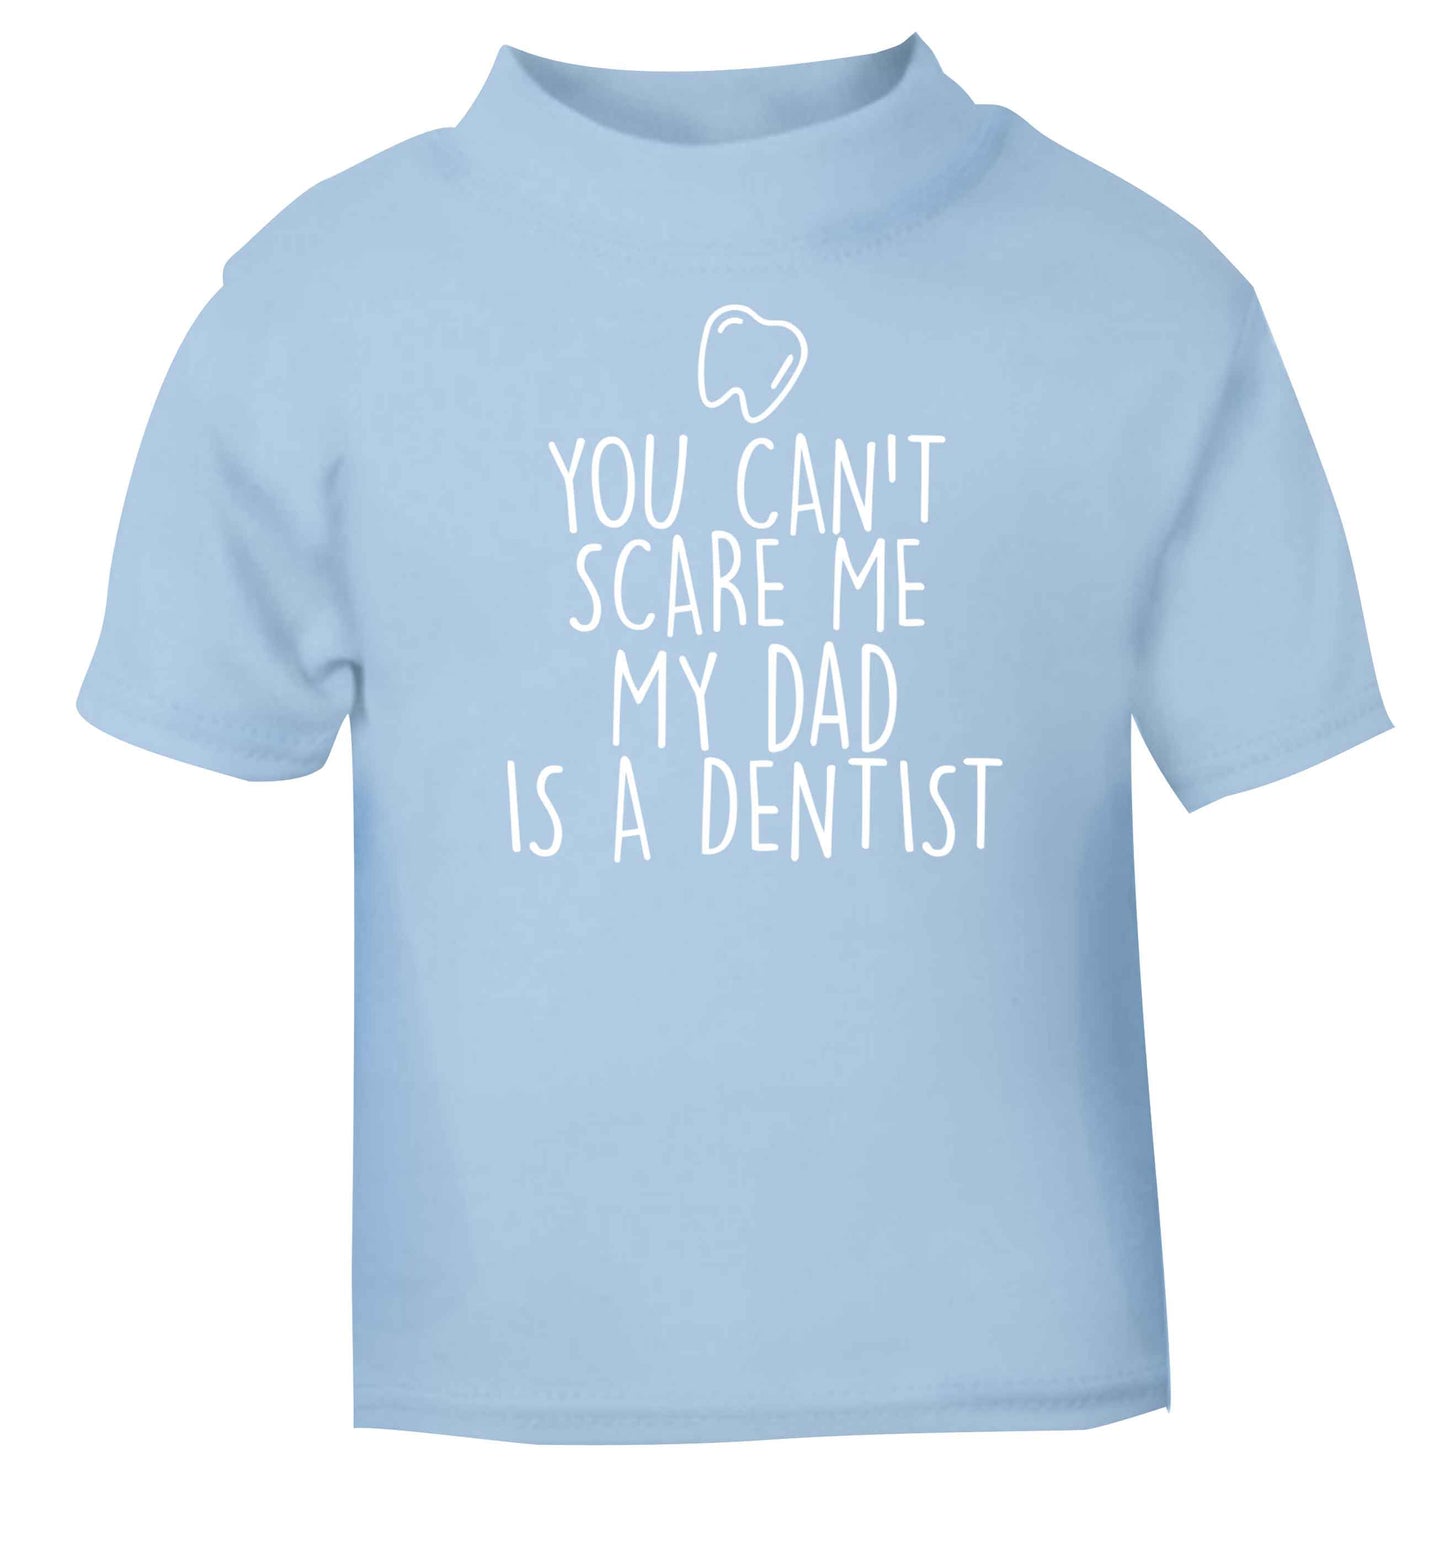 You can't scare me my dad is a dentist light blue baby toddler Tshirt 2 Years